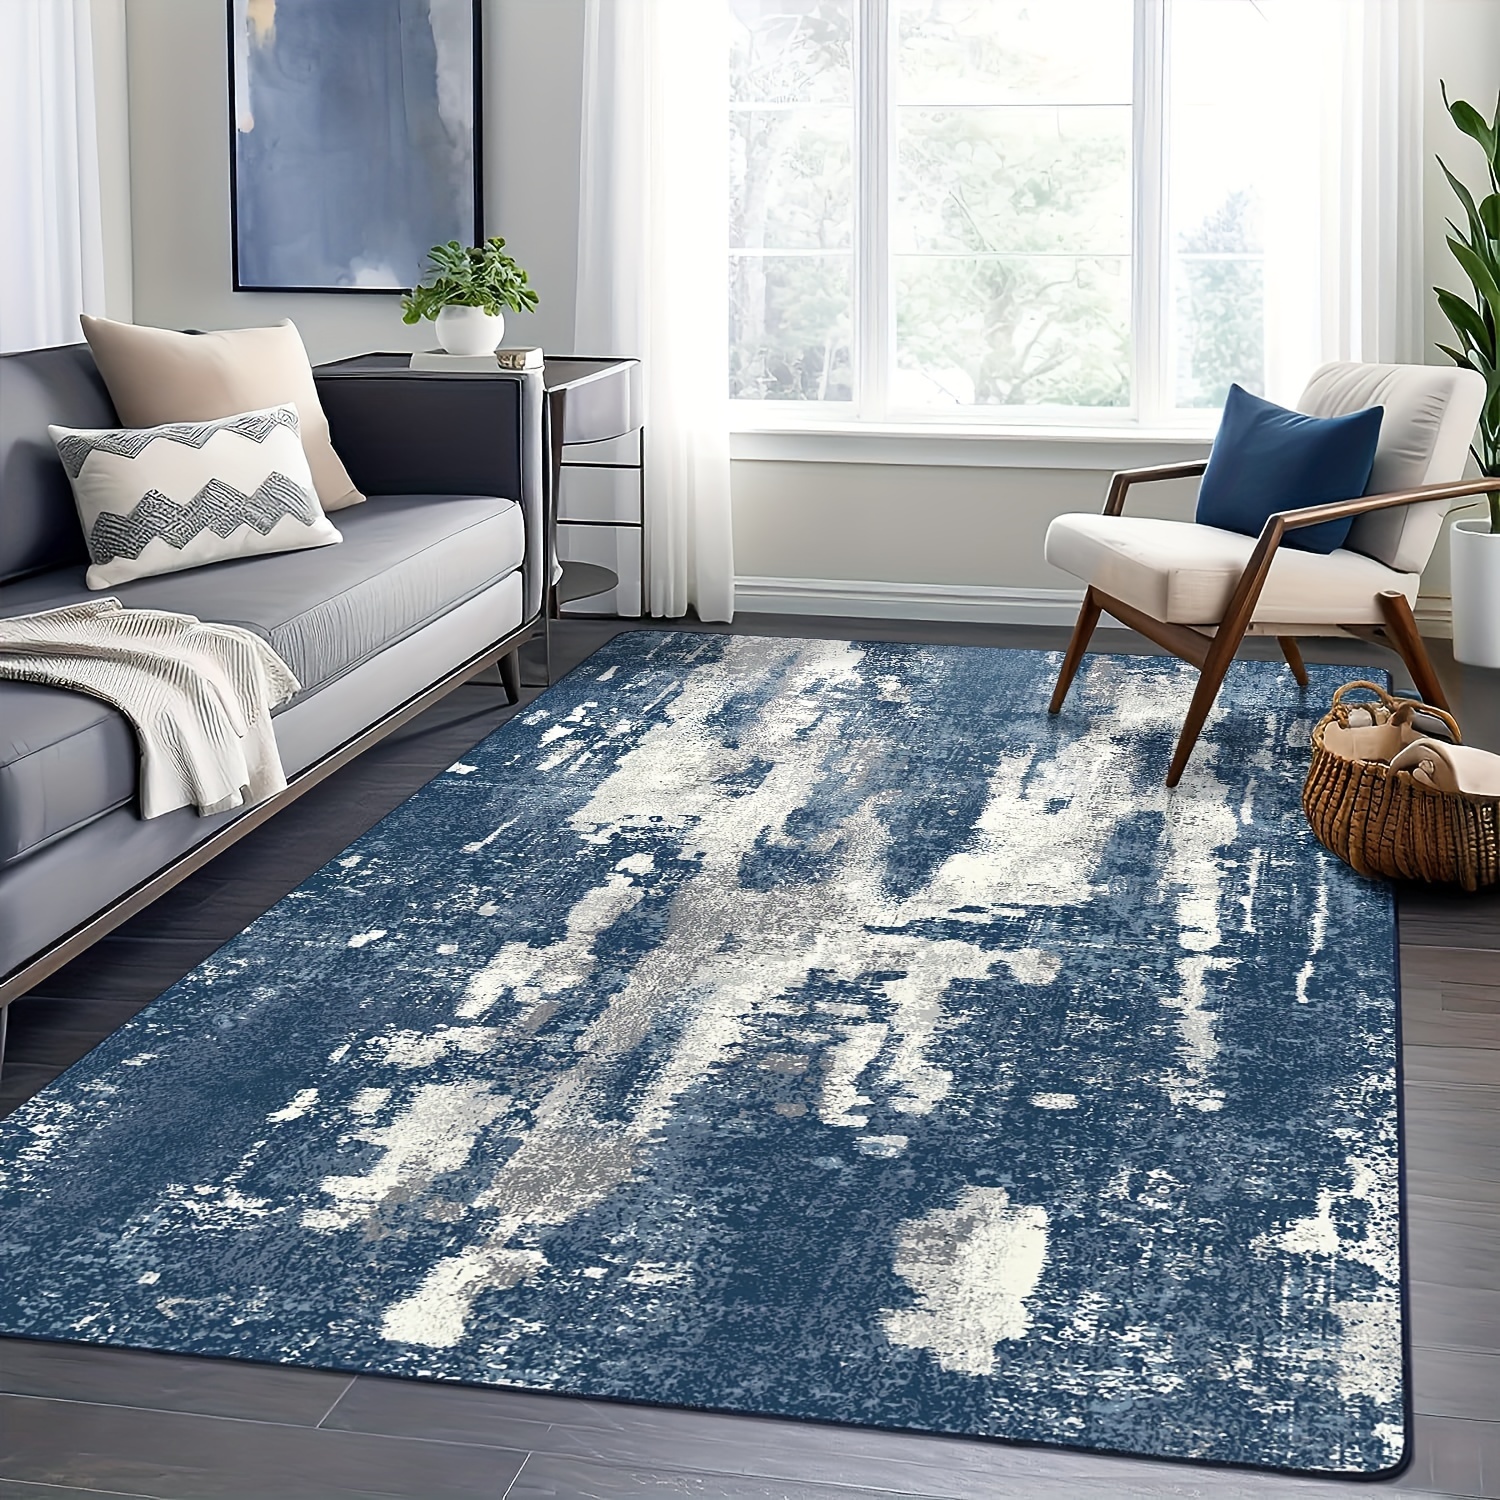 

Area Rugs For Living Room Bedroom Machine Washable Modern Abstract Soft Large Blue Rugs With Non Slip Backing, Floor Carpet For Dining Room